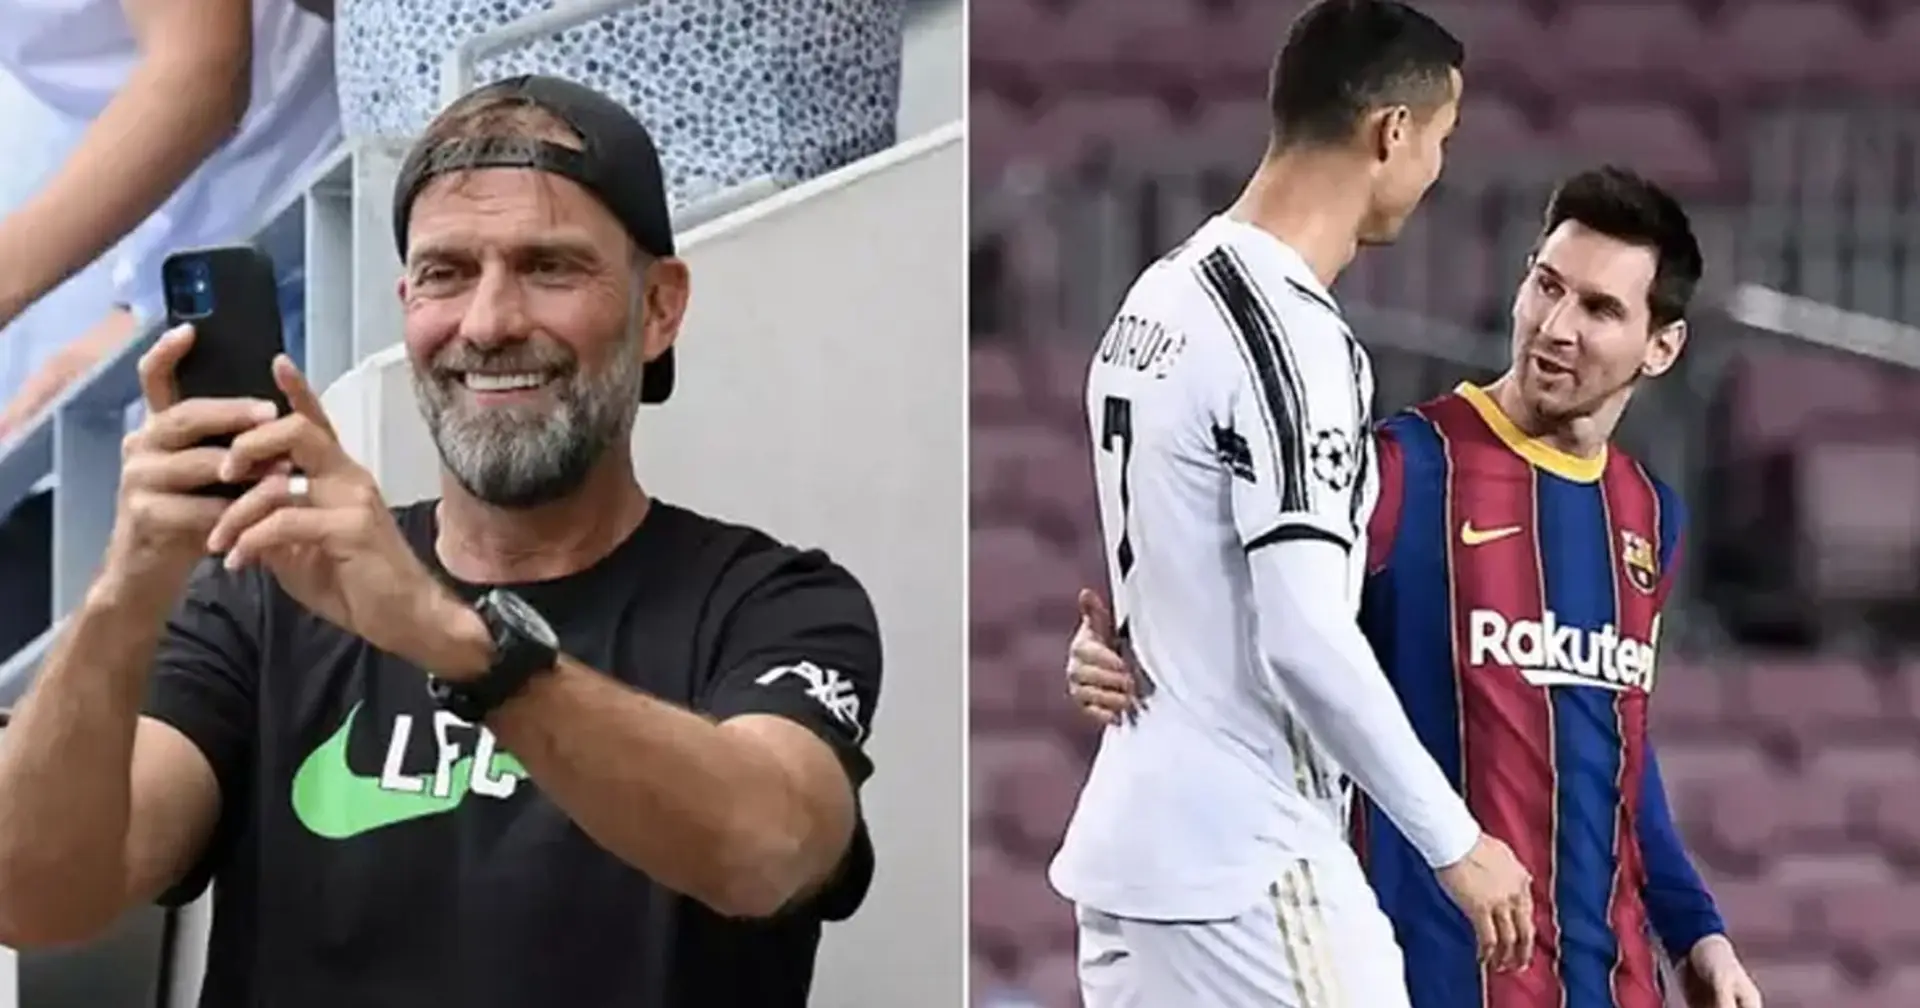 'If you love football, how can you not be his fan?': Klopp picks football GOAT - he even has a selfie with him